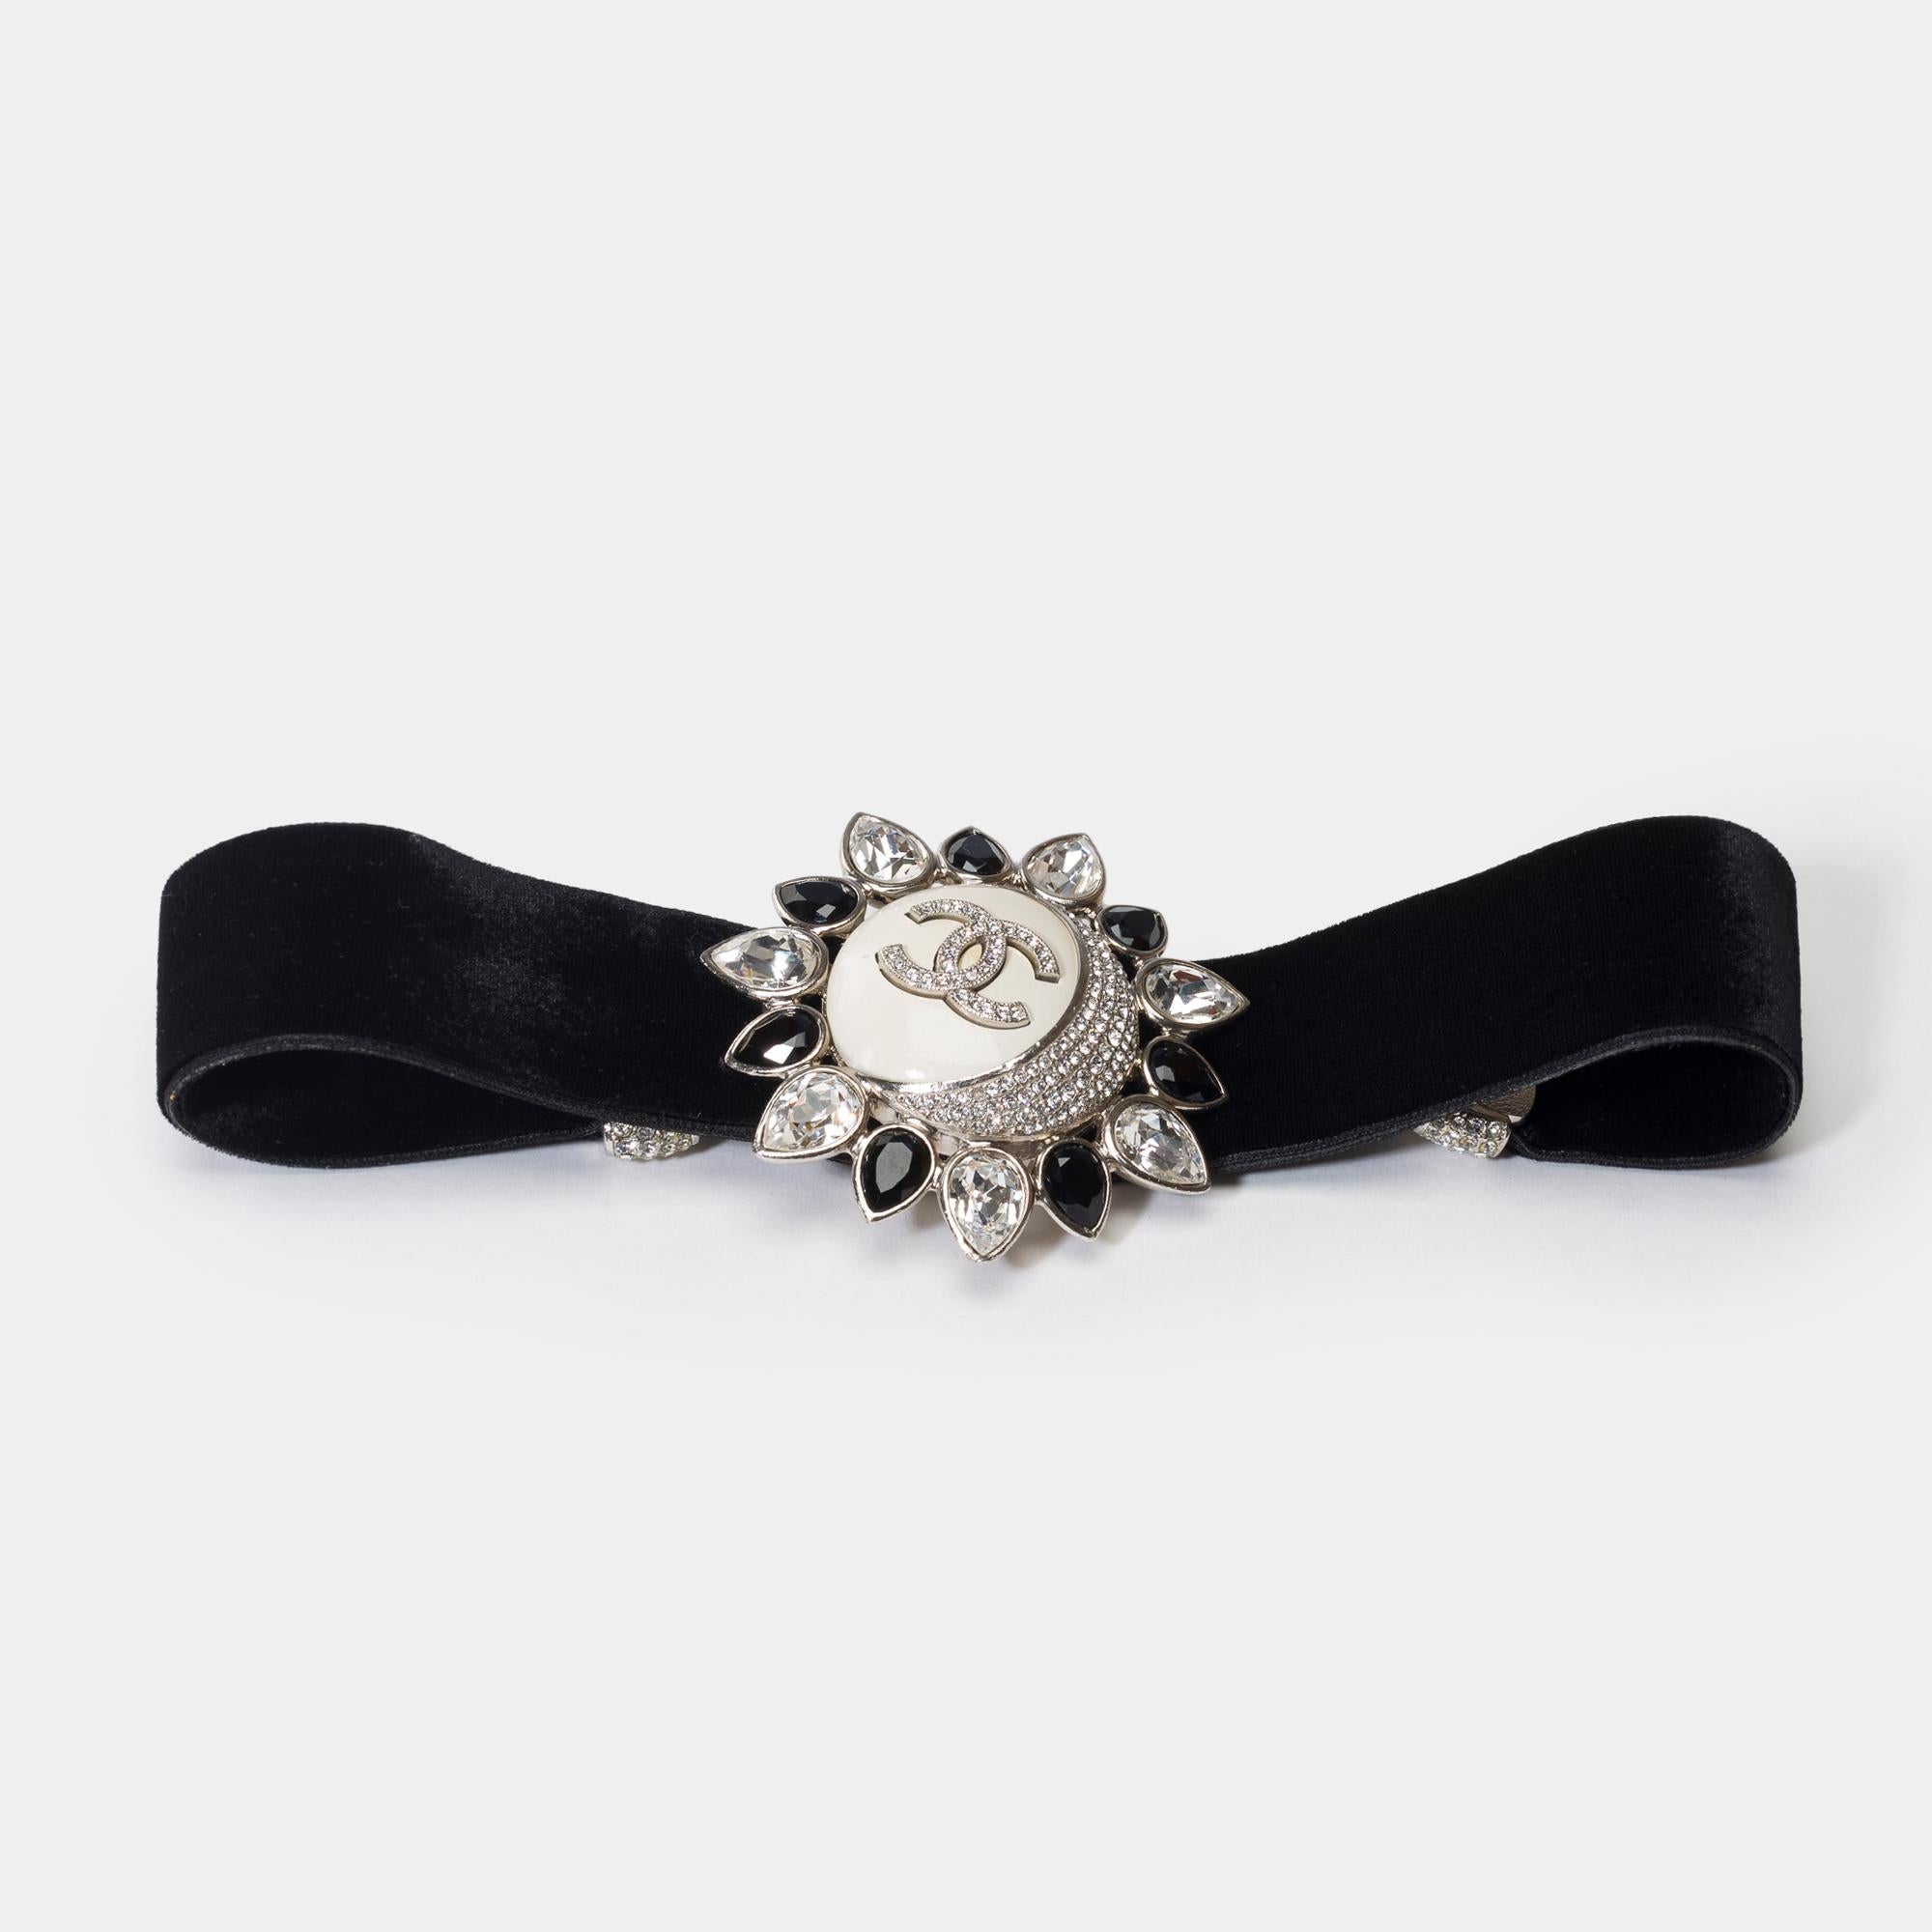 Splendid​ ​Chanel​ ​Choker​ ​in​ ​velvet​ ​embellished​ ​with​ ​rhinestones,​ ​glass​ ​beads,​ ​silver​ ​and​ ​black​ ​crystals

Signature:​ ​